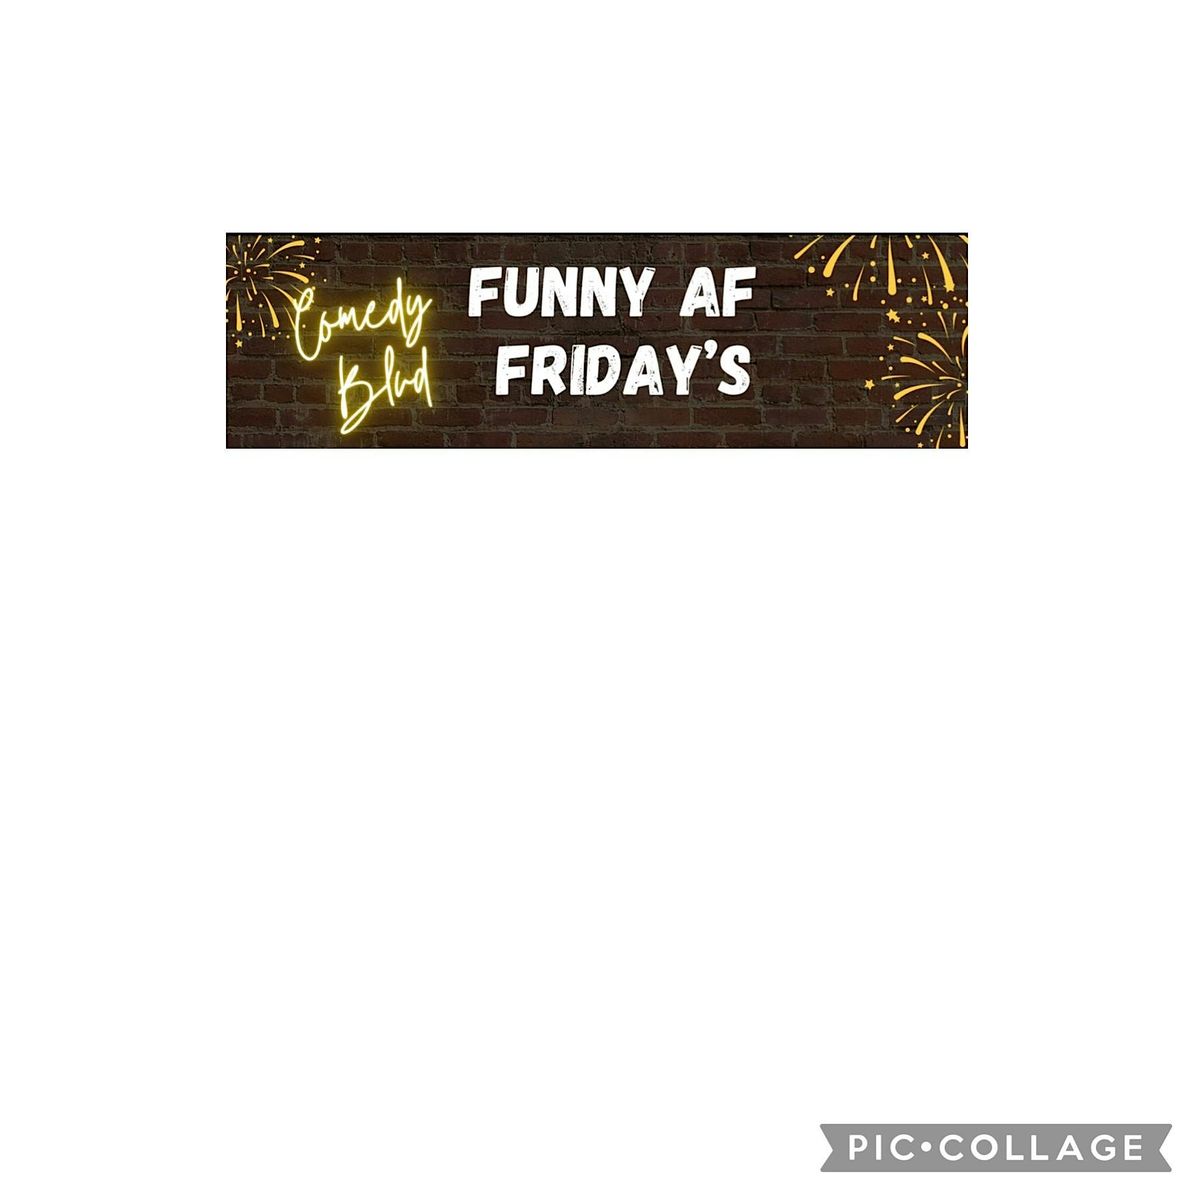 Friday, July 5th, 8:30 PM - Funny AF Friday's!!! Comedy Blvd